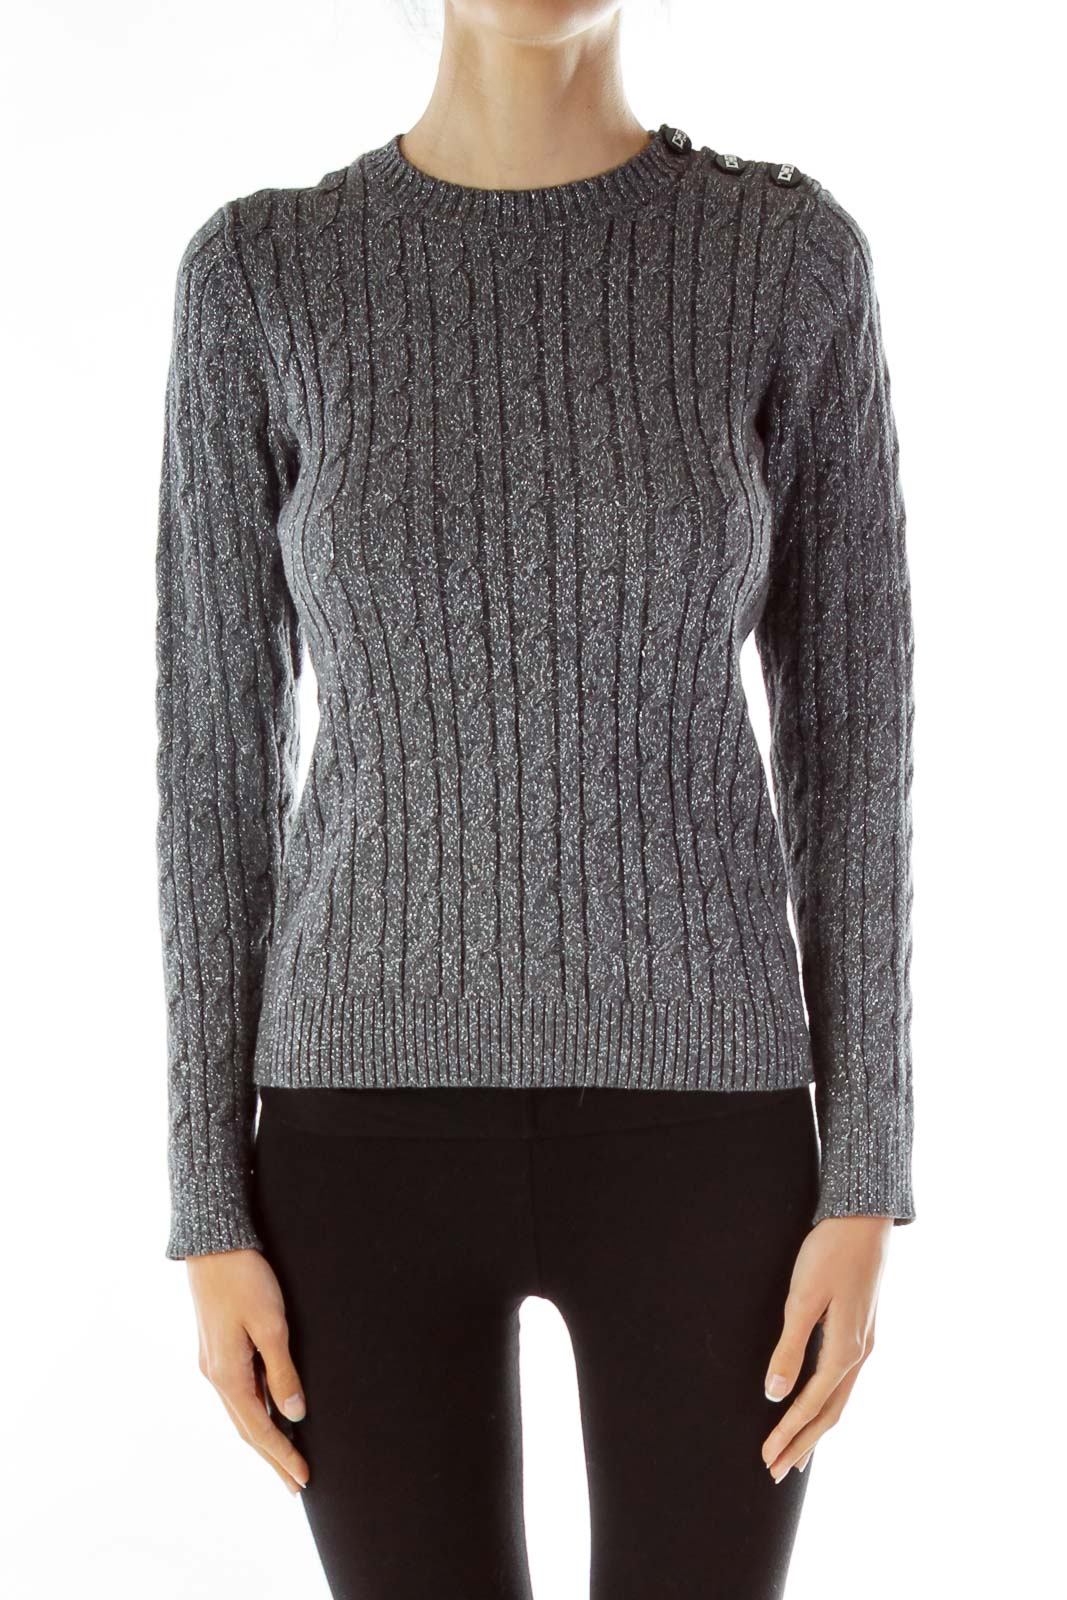 Gray Metallic Cable Knit Sweater Front